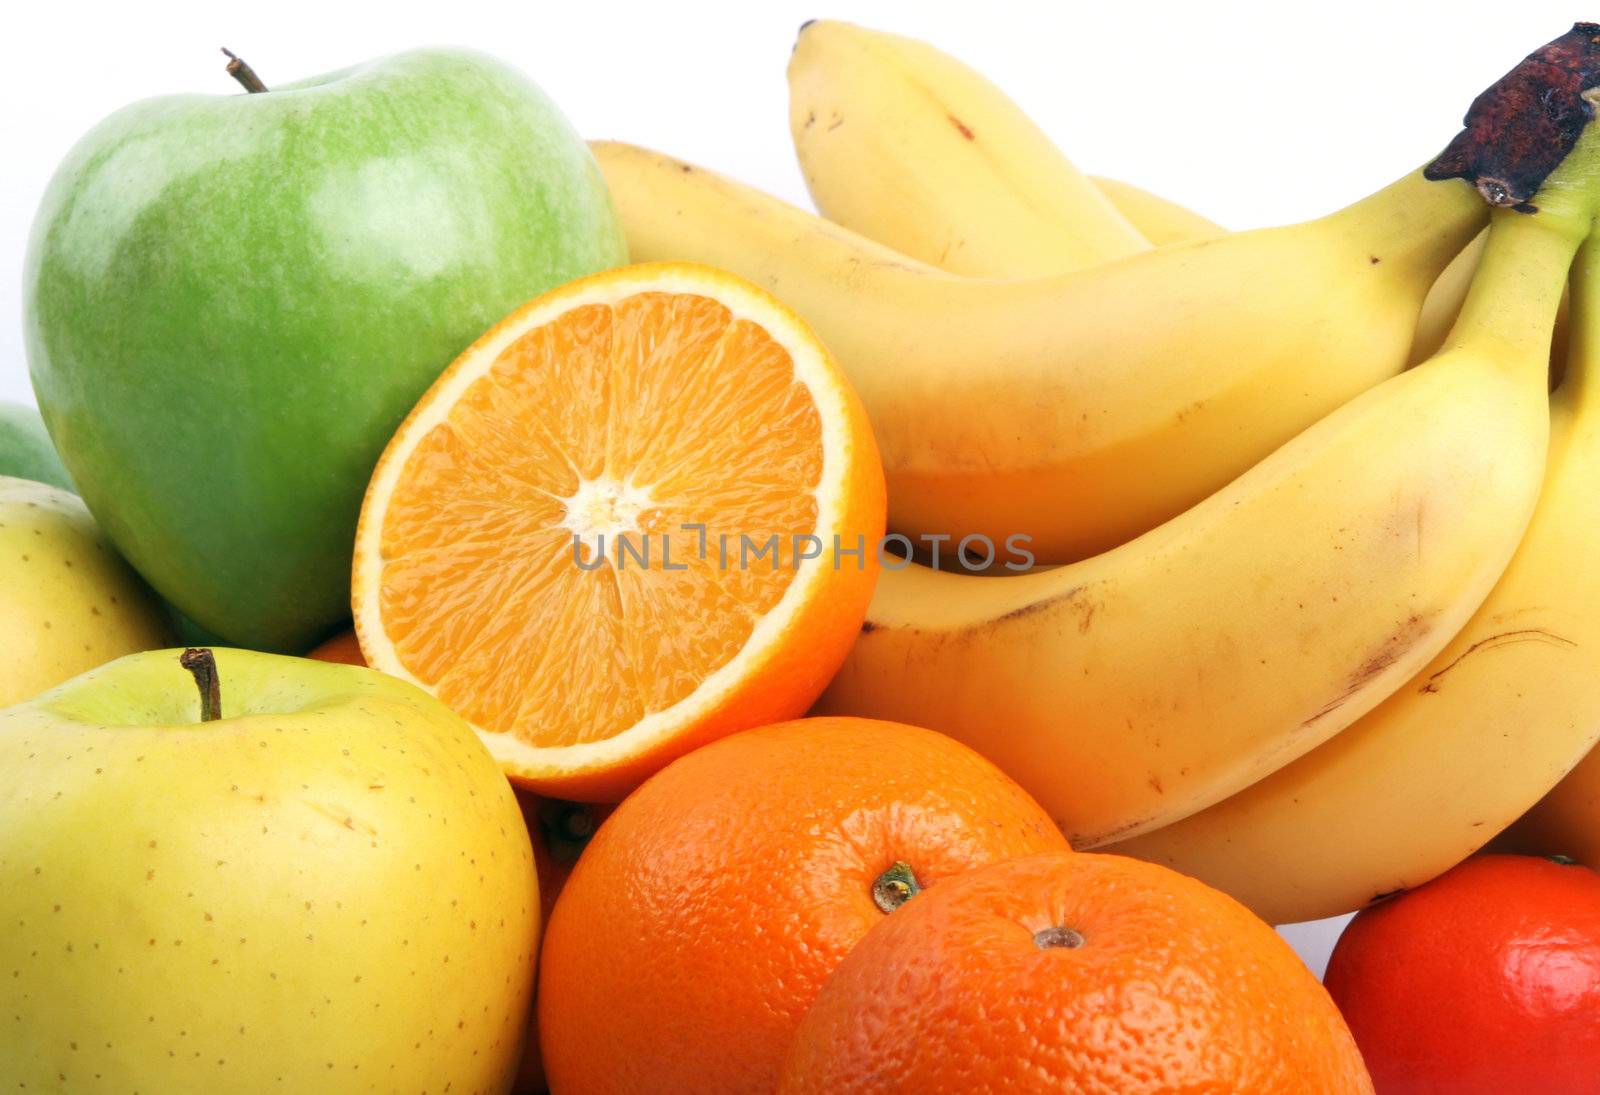 Group of fruits: orange, apple, bananas and a tangerine